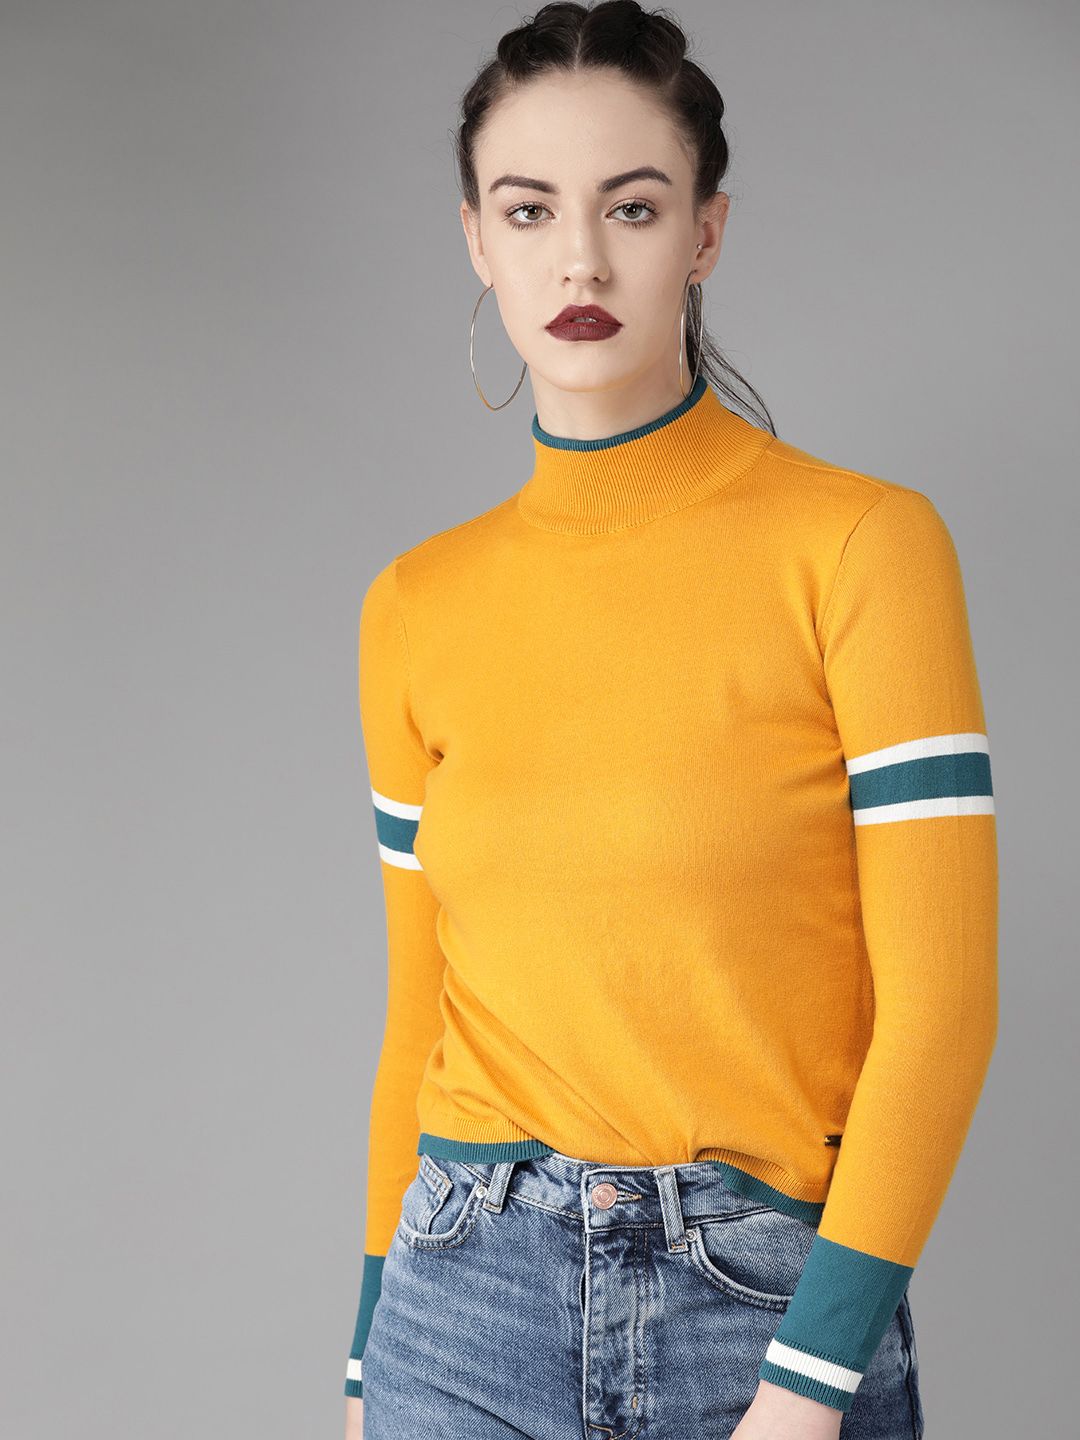 The Roadster Lifestyle Co Women Mustard Yellow Solid Sweater Price in India